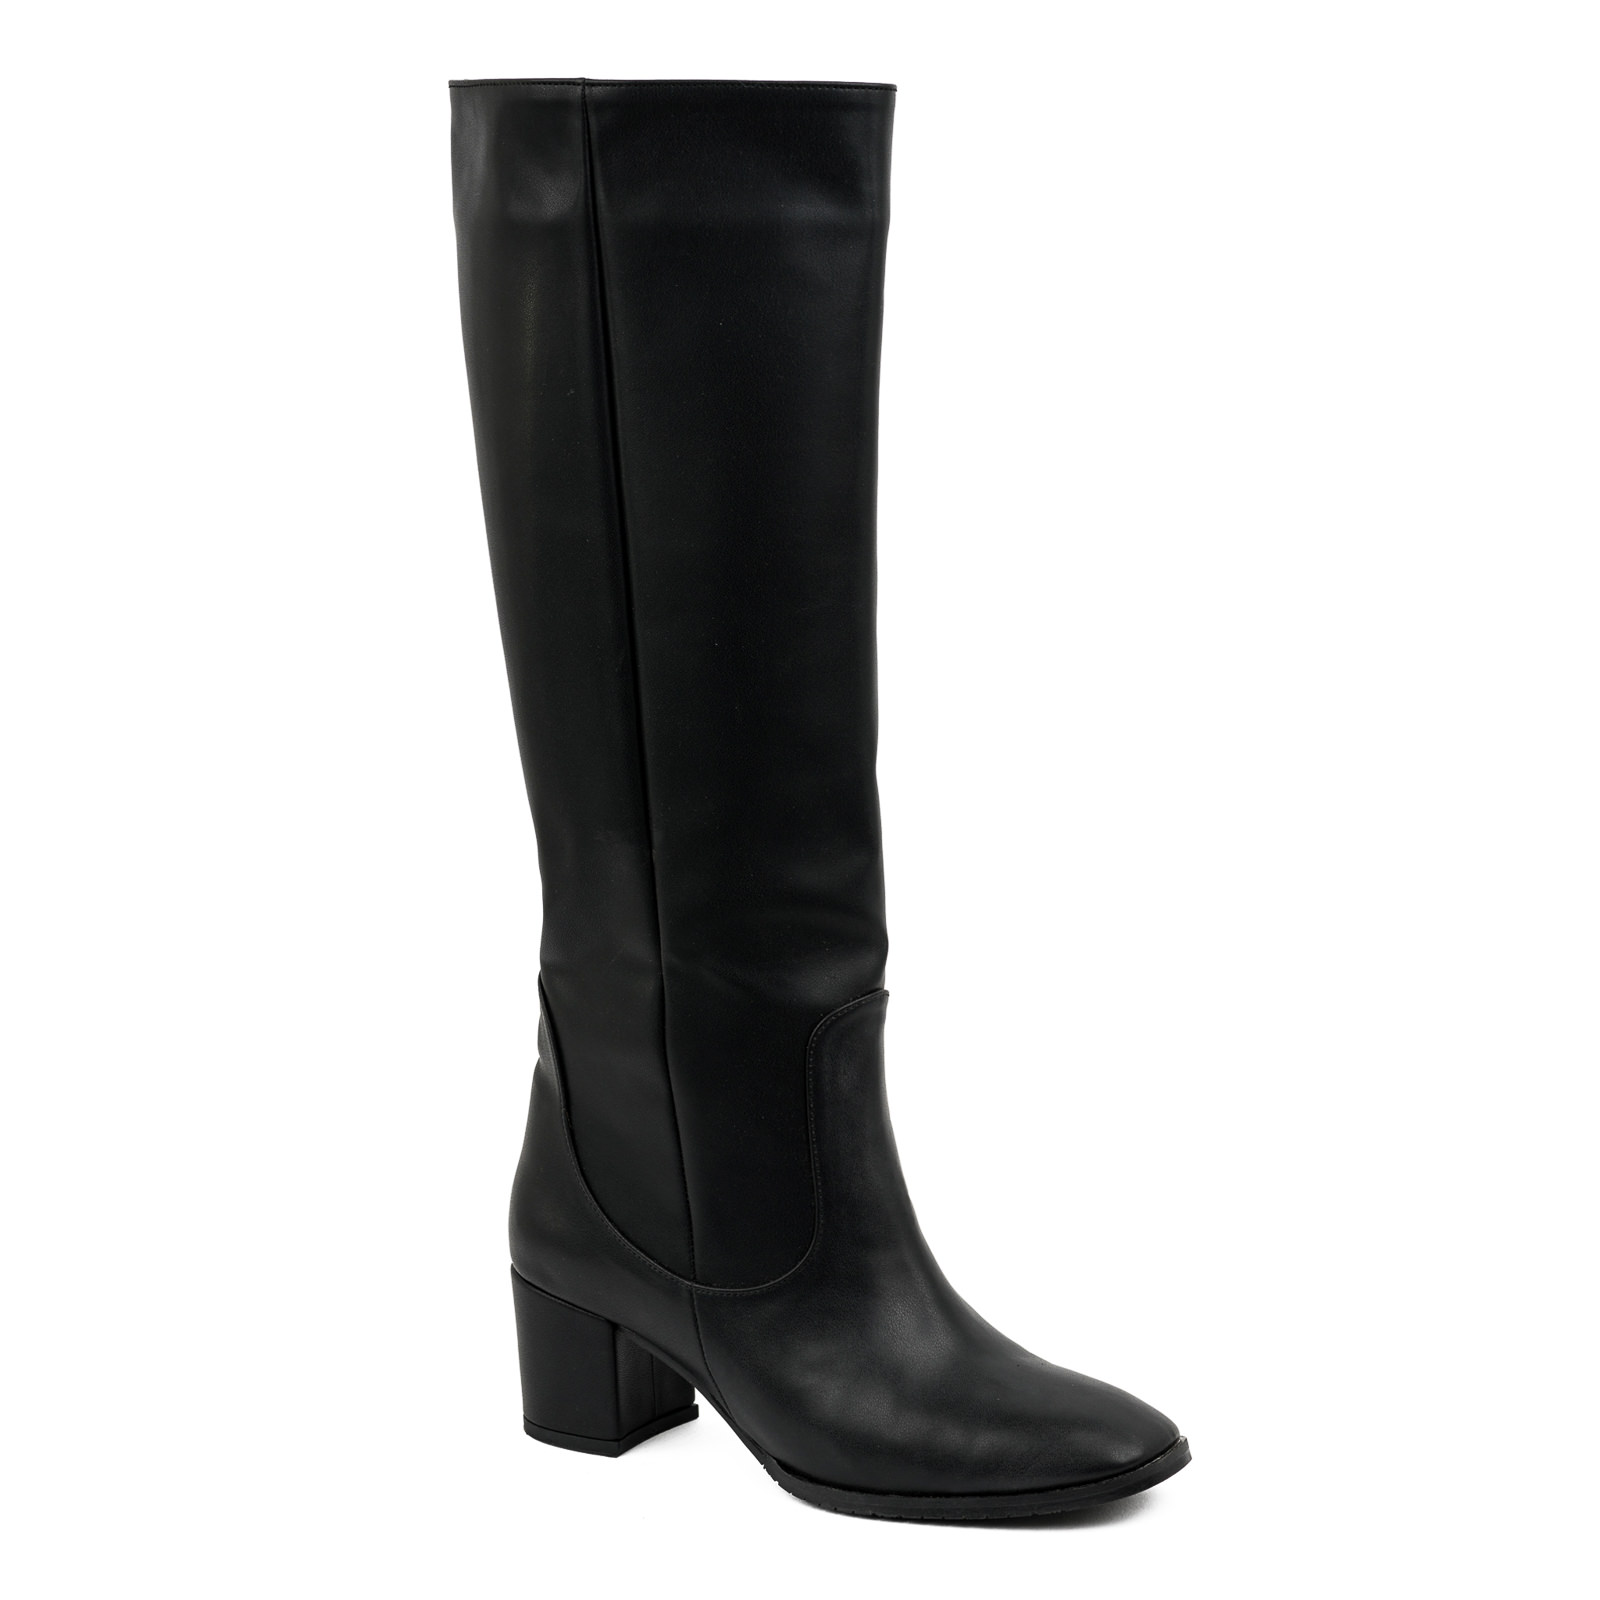 PULL ON KNEE HIGH BOOTS CHUNKY HEEL BOOTS - BLACK